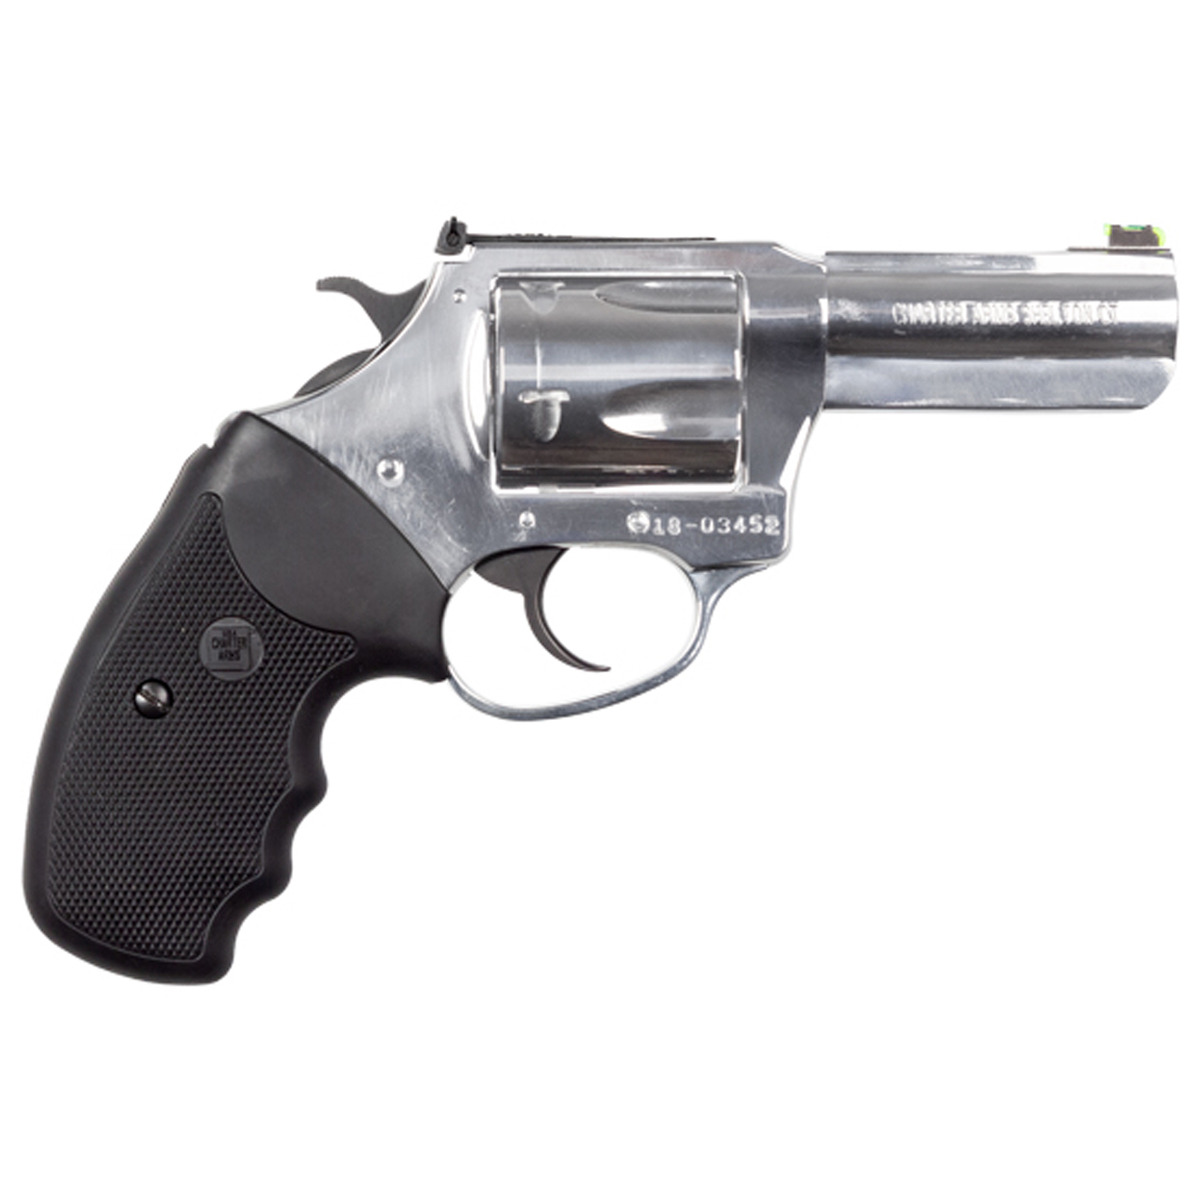 Charter Arms Mag Pug 357 Magnum 3in Stainless Steel Revolver 5 Rounds